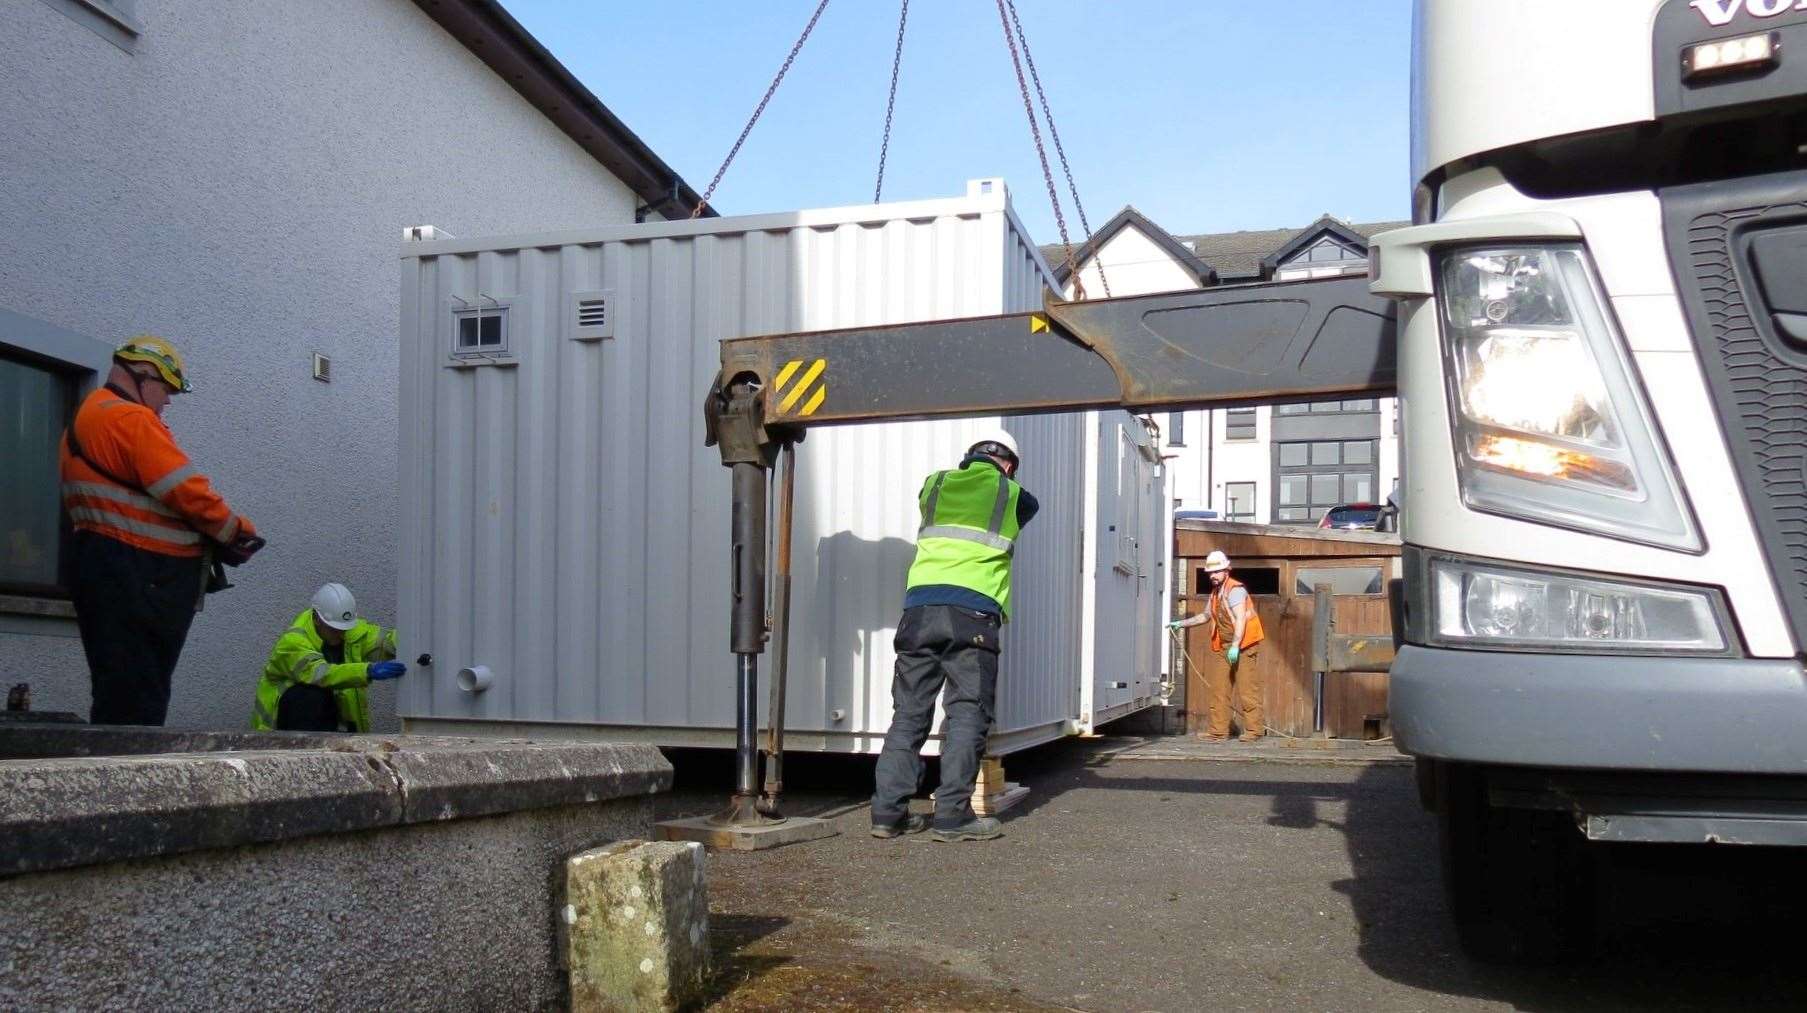 One of the specialist units is fixed into place at Thurso.